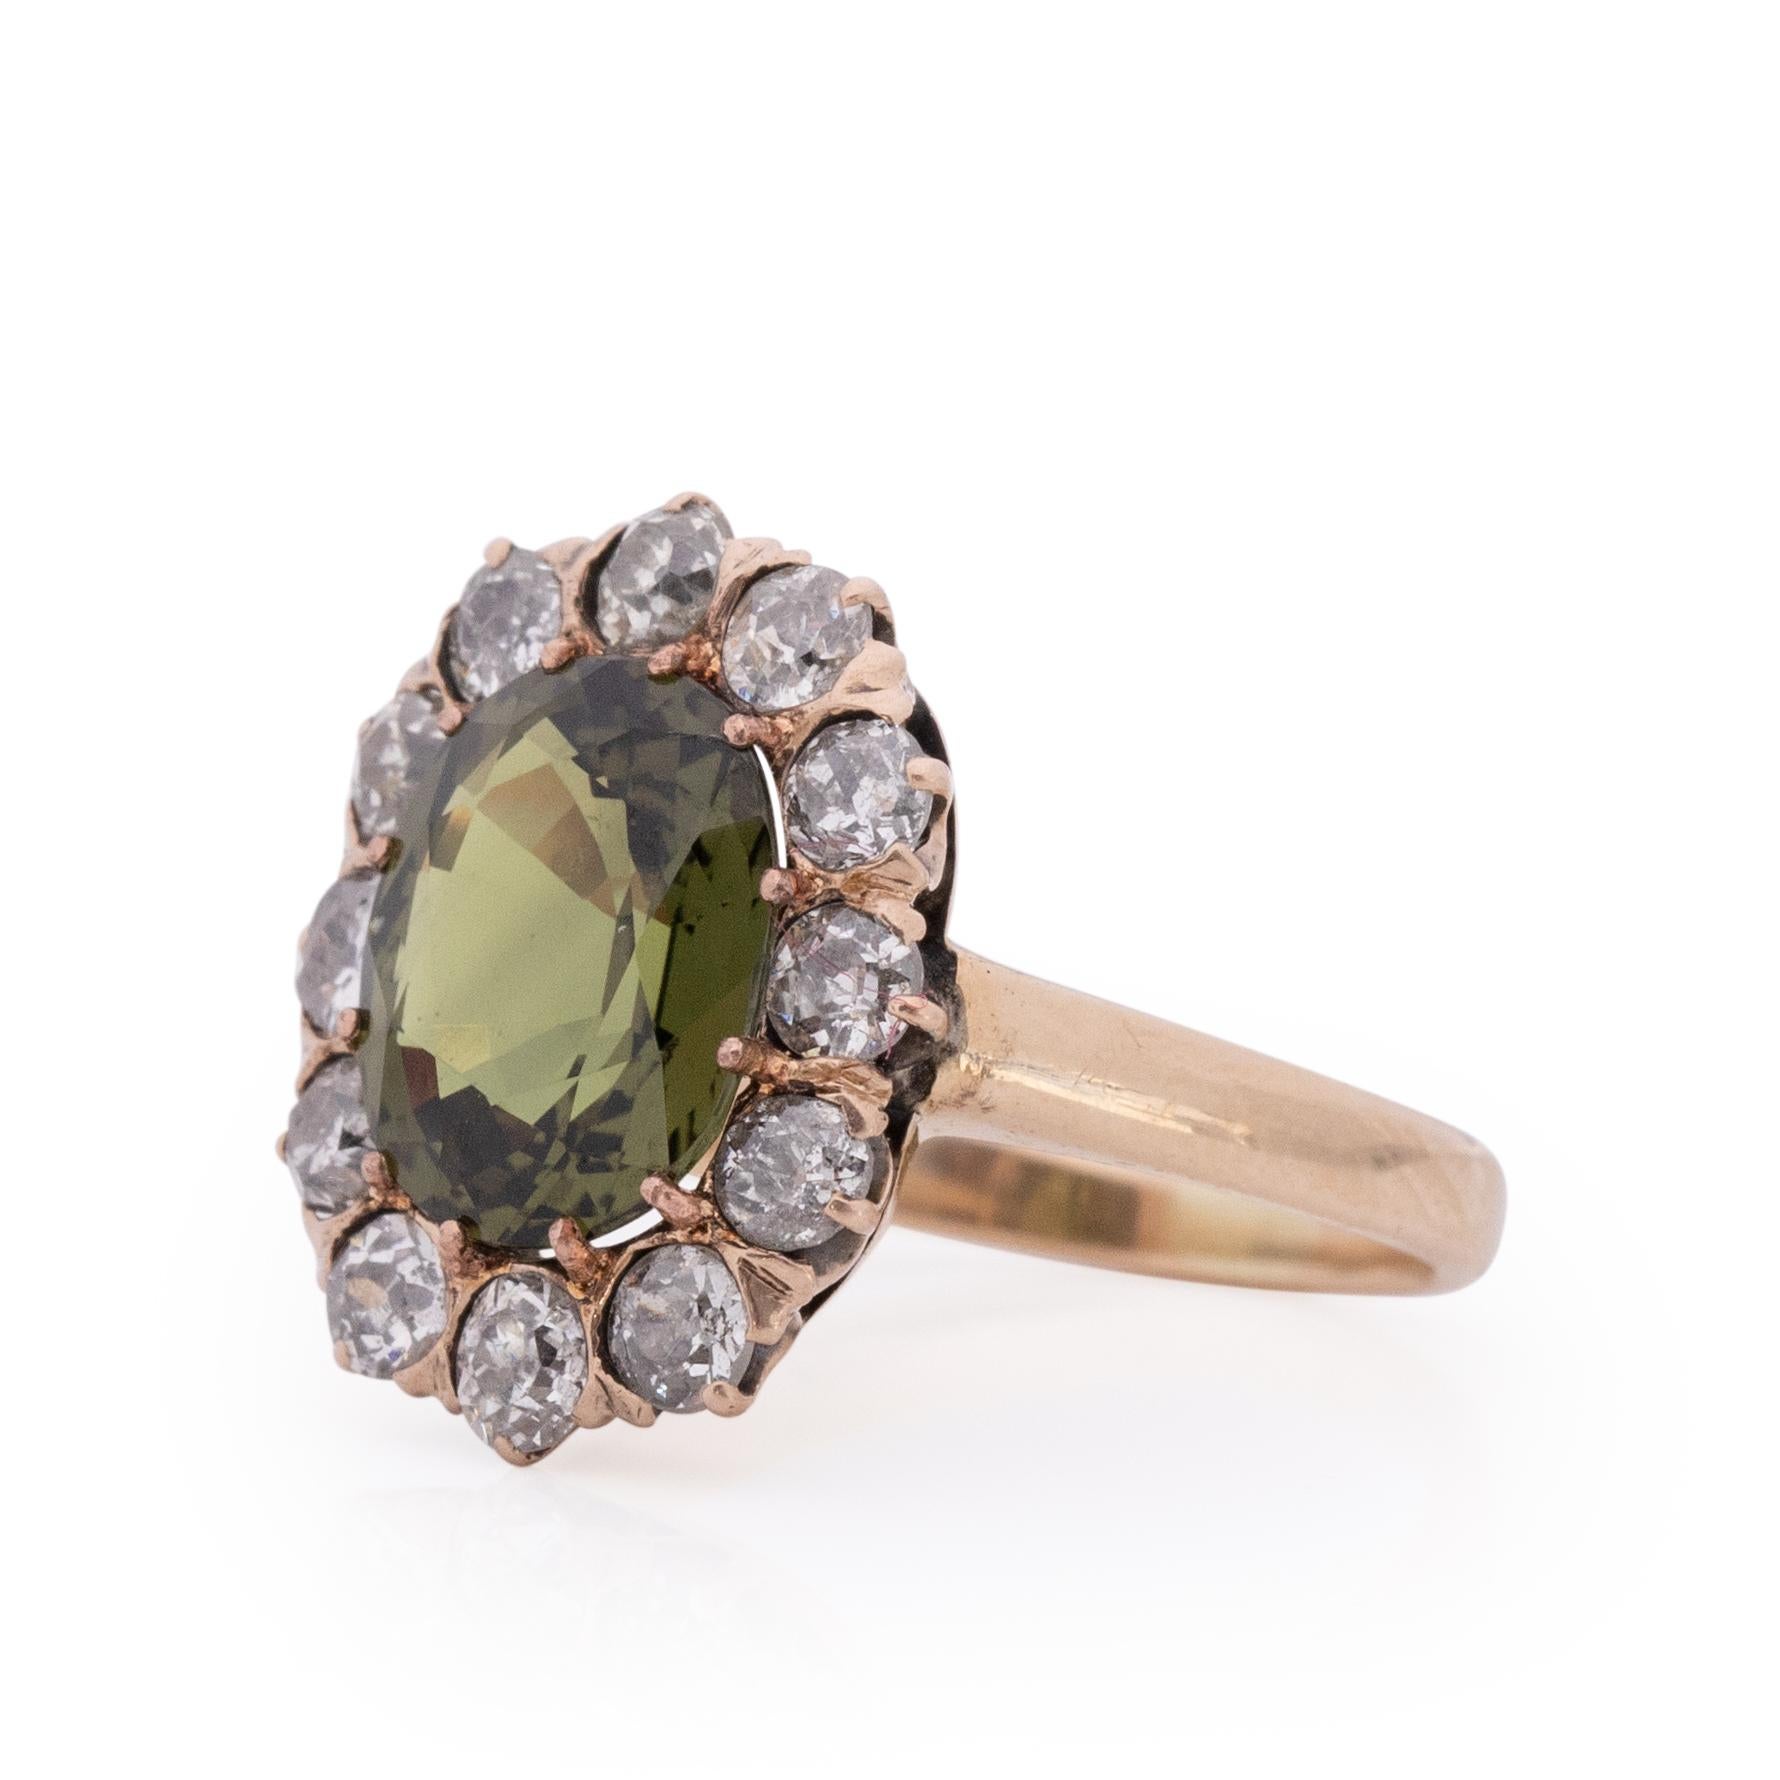 The Edwardian era is known for its  femininity and flowing lines, with a abundance of glitz and glam. This ring takes the cake! A breathtaking 3.63Ct oval brilliant cut moss/olive green sapphire sits in the center of a old mine cut diamond halo that